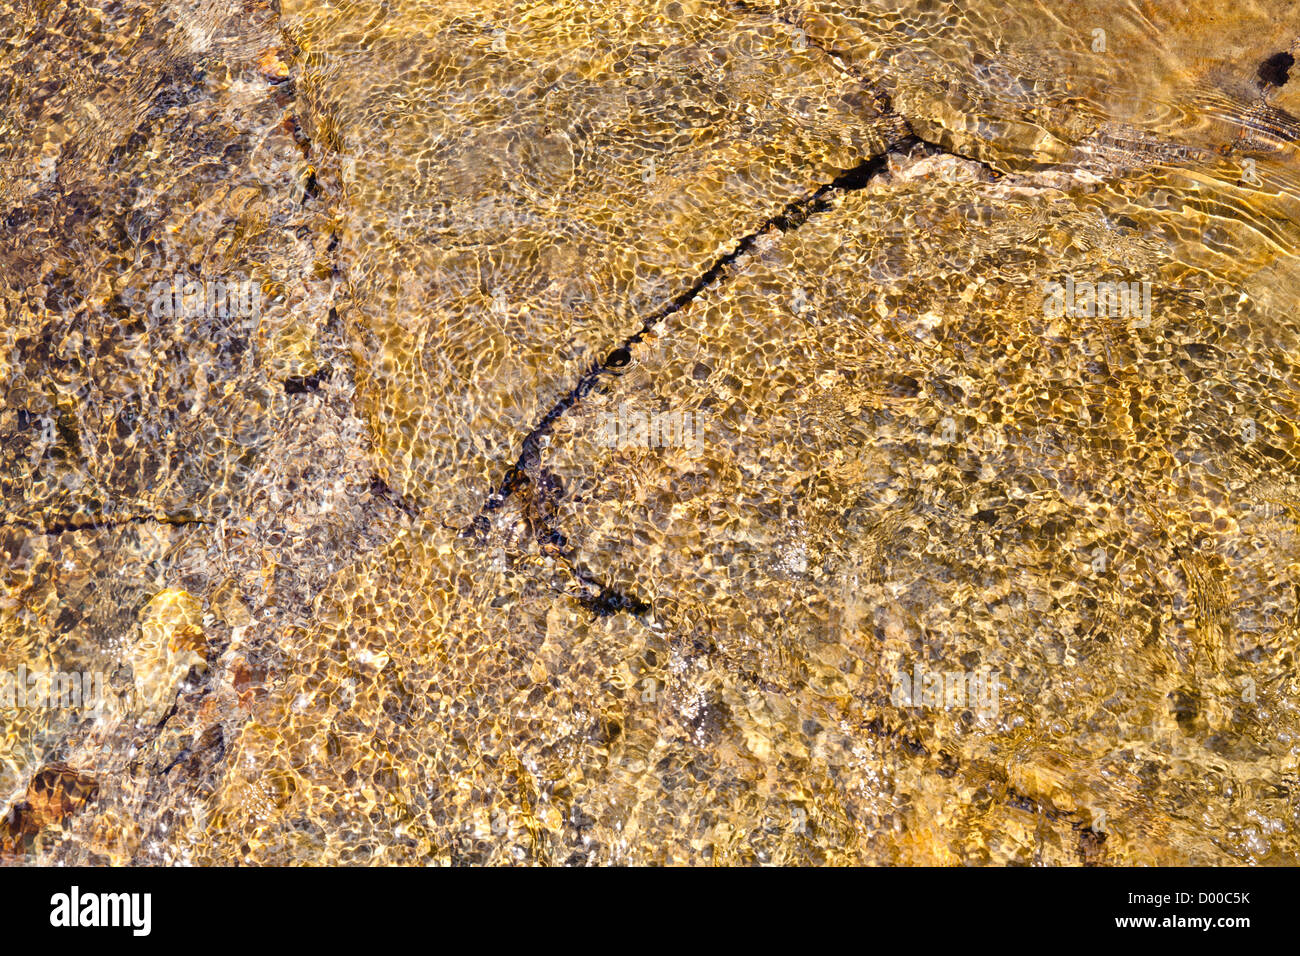 Sunlight on rippling waters forming patterns and distortion through refraction in stream water flowing over stone, England, UK Stock Photo